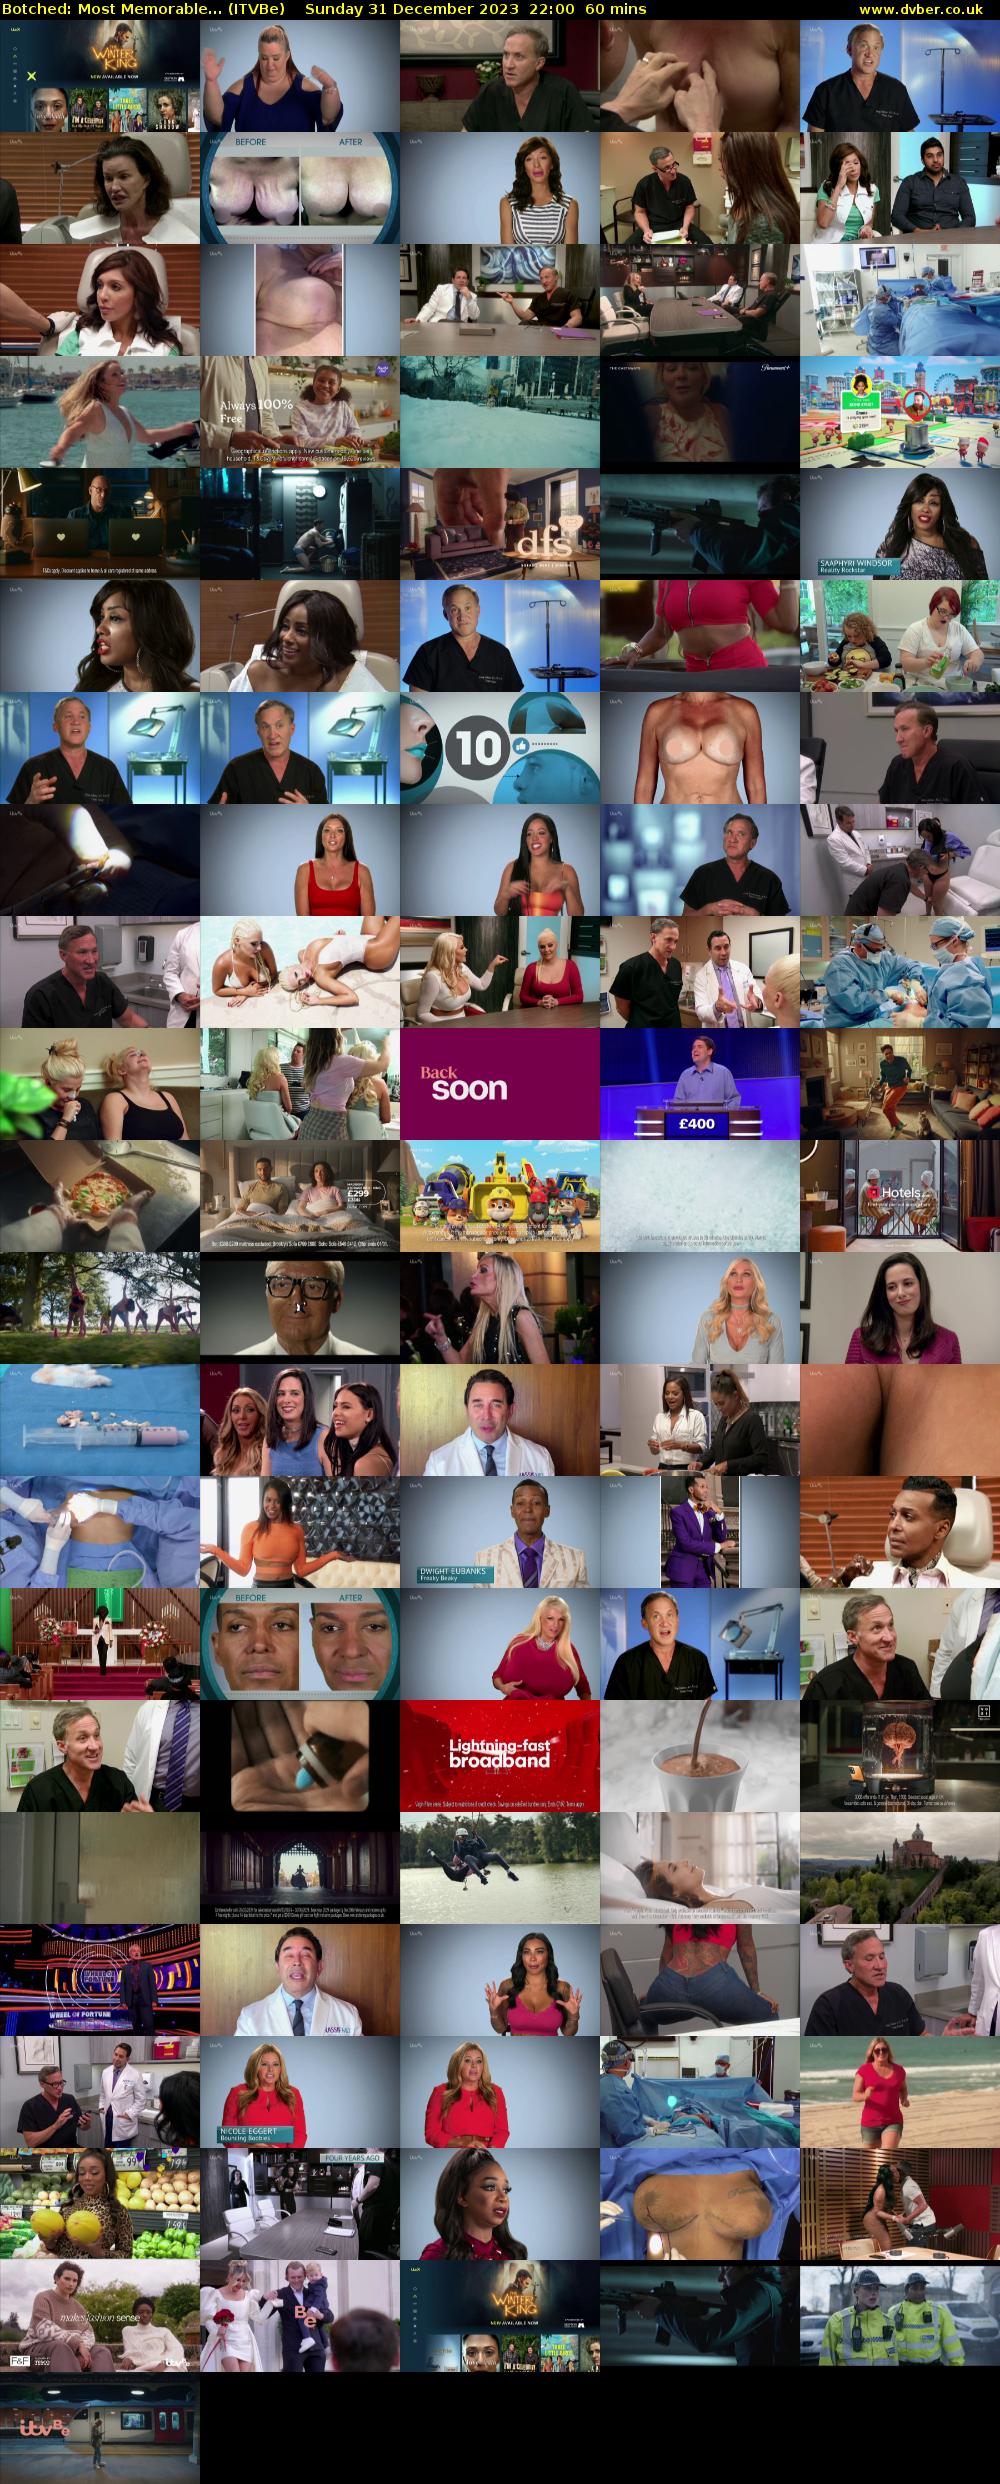 Botched: Most Memorable... (ITVBe) Sunday 31 December 2023 22:00 - 23:00